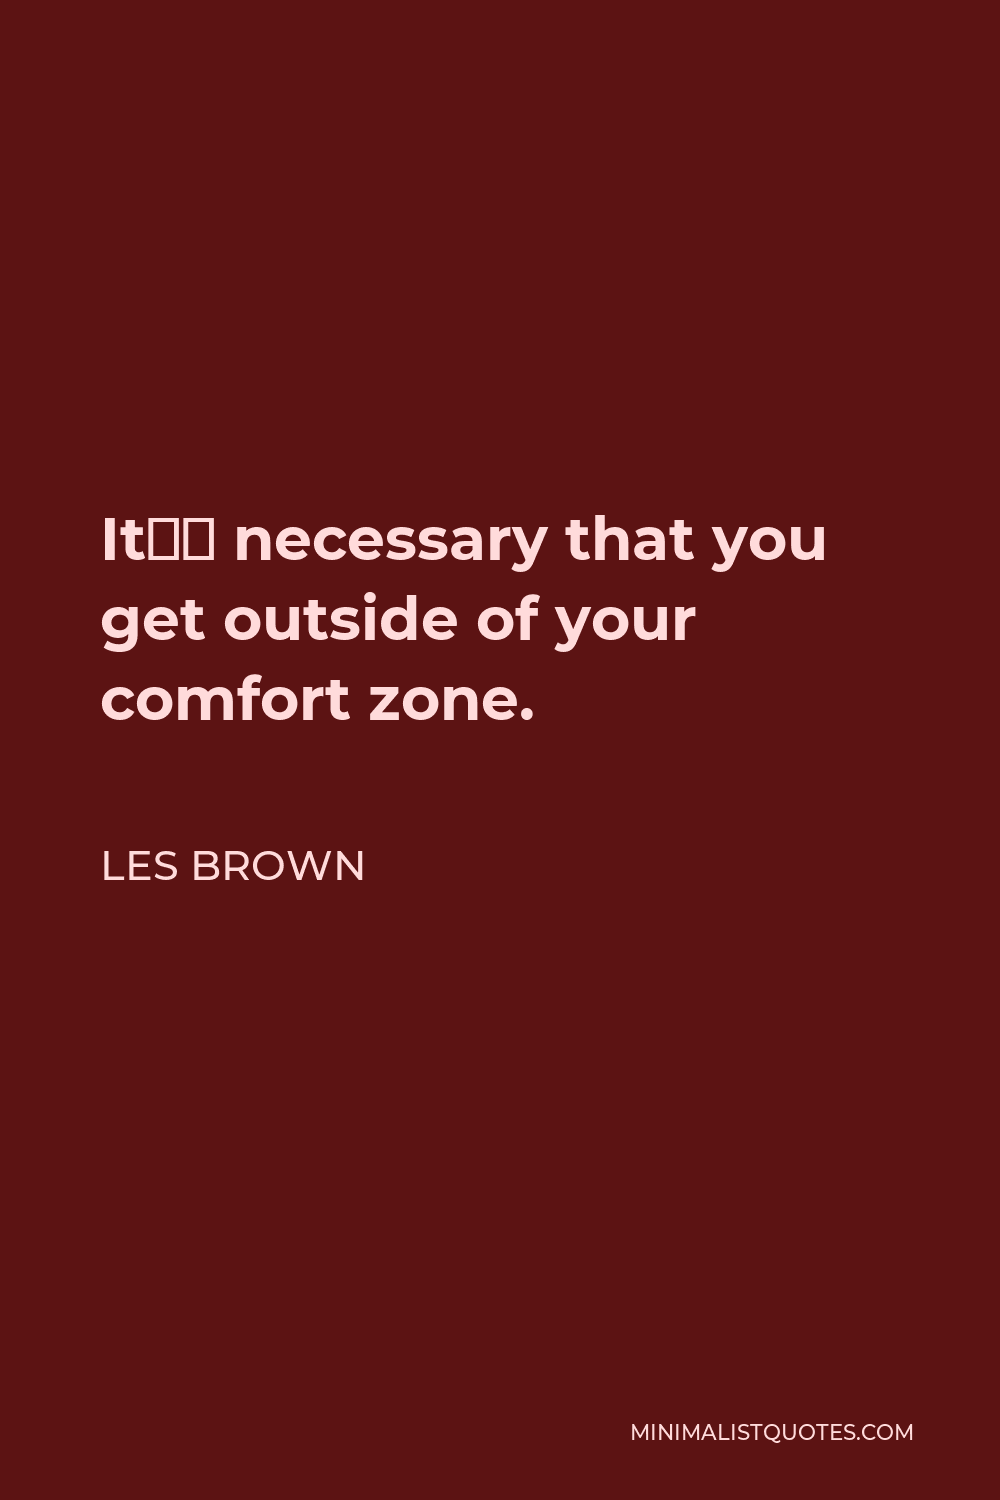 Les Brown Quote - It’s necessary that you get outside of your comfort zone.